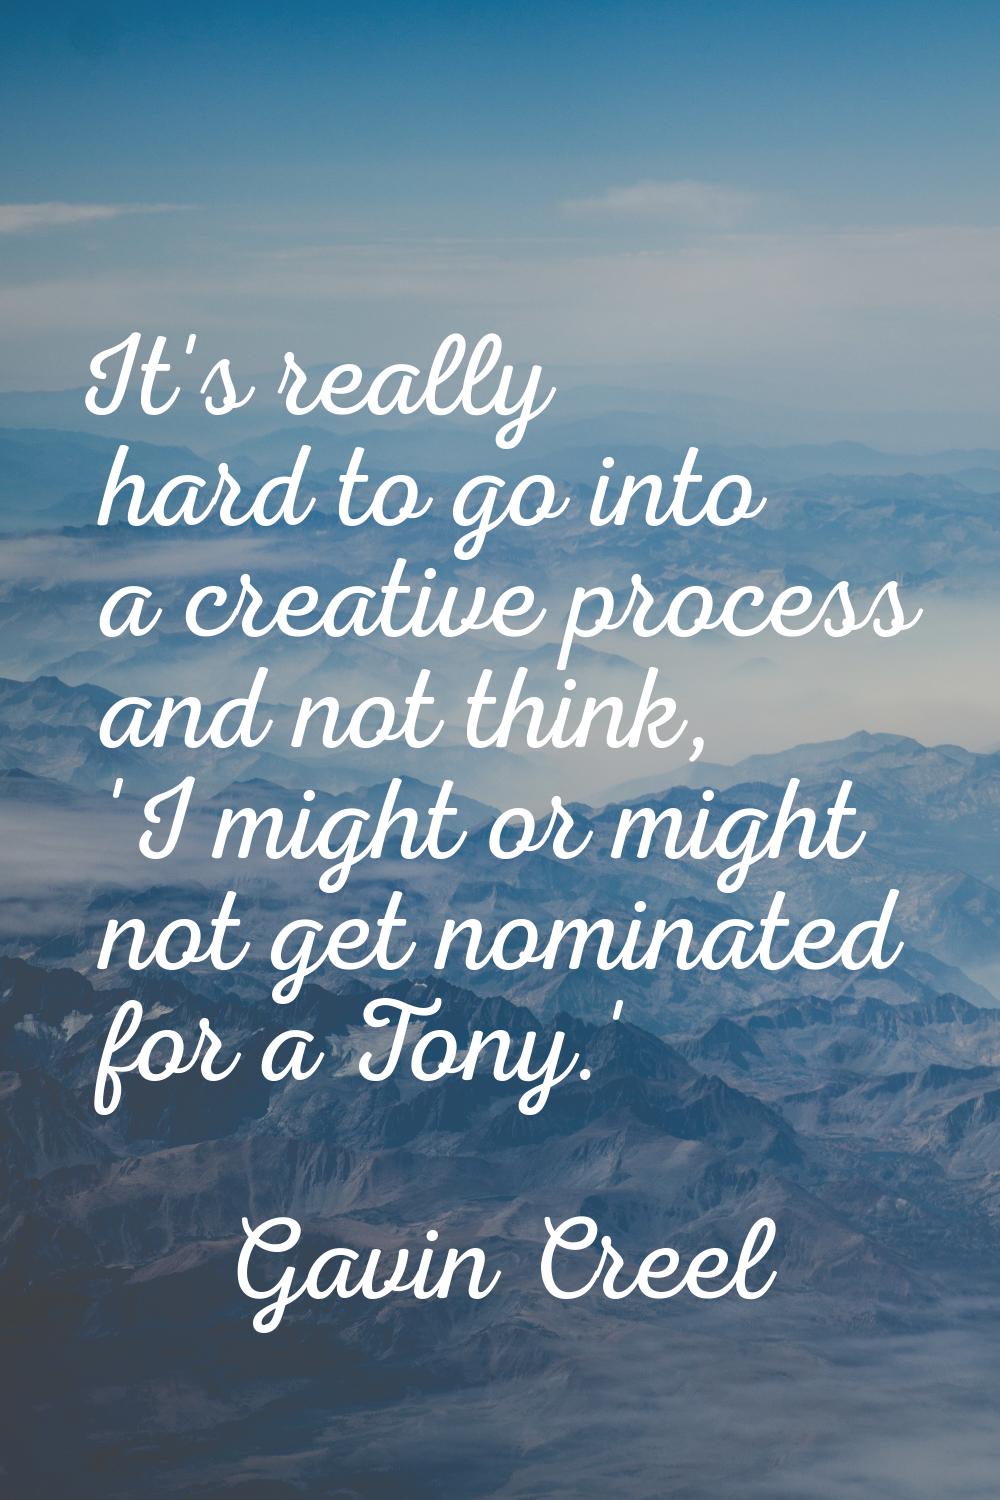 It's really hard to go into a creative process and not think, 'I might or might not get nominated f